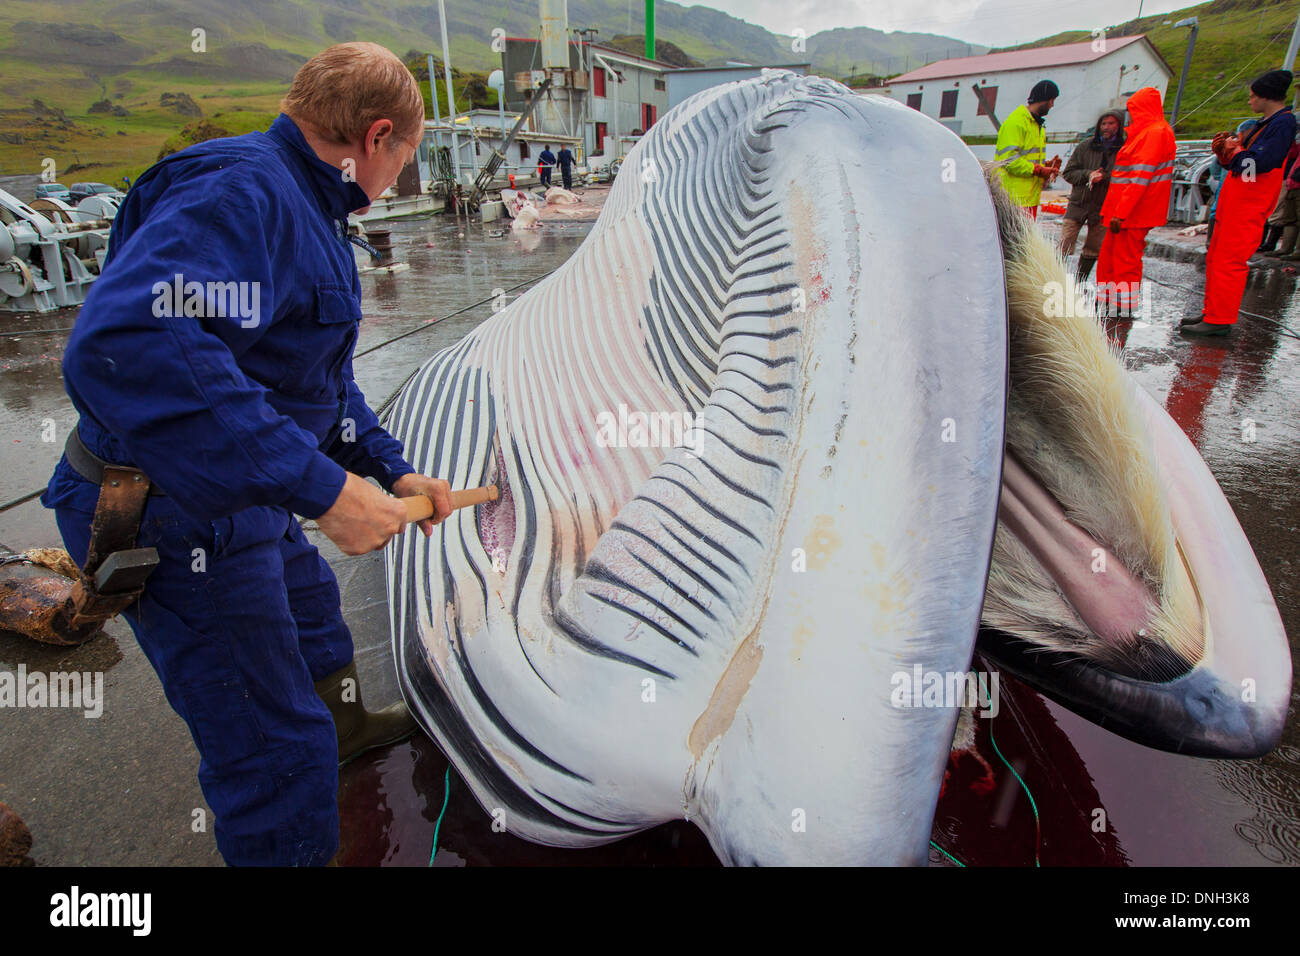 CUTTING UP OF A FINBACK WHALE AT THE SEASIDE RESORT OF HVALFJORDUR, THE FJORD OF WHALES, WHALE HUNTING IN ICELAND, WESTERN ICELAND, EUROPE Stock Photo